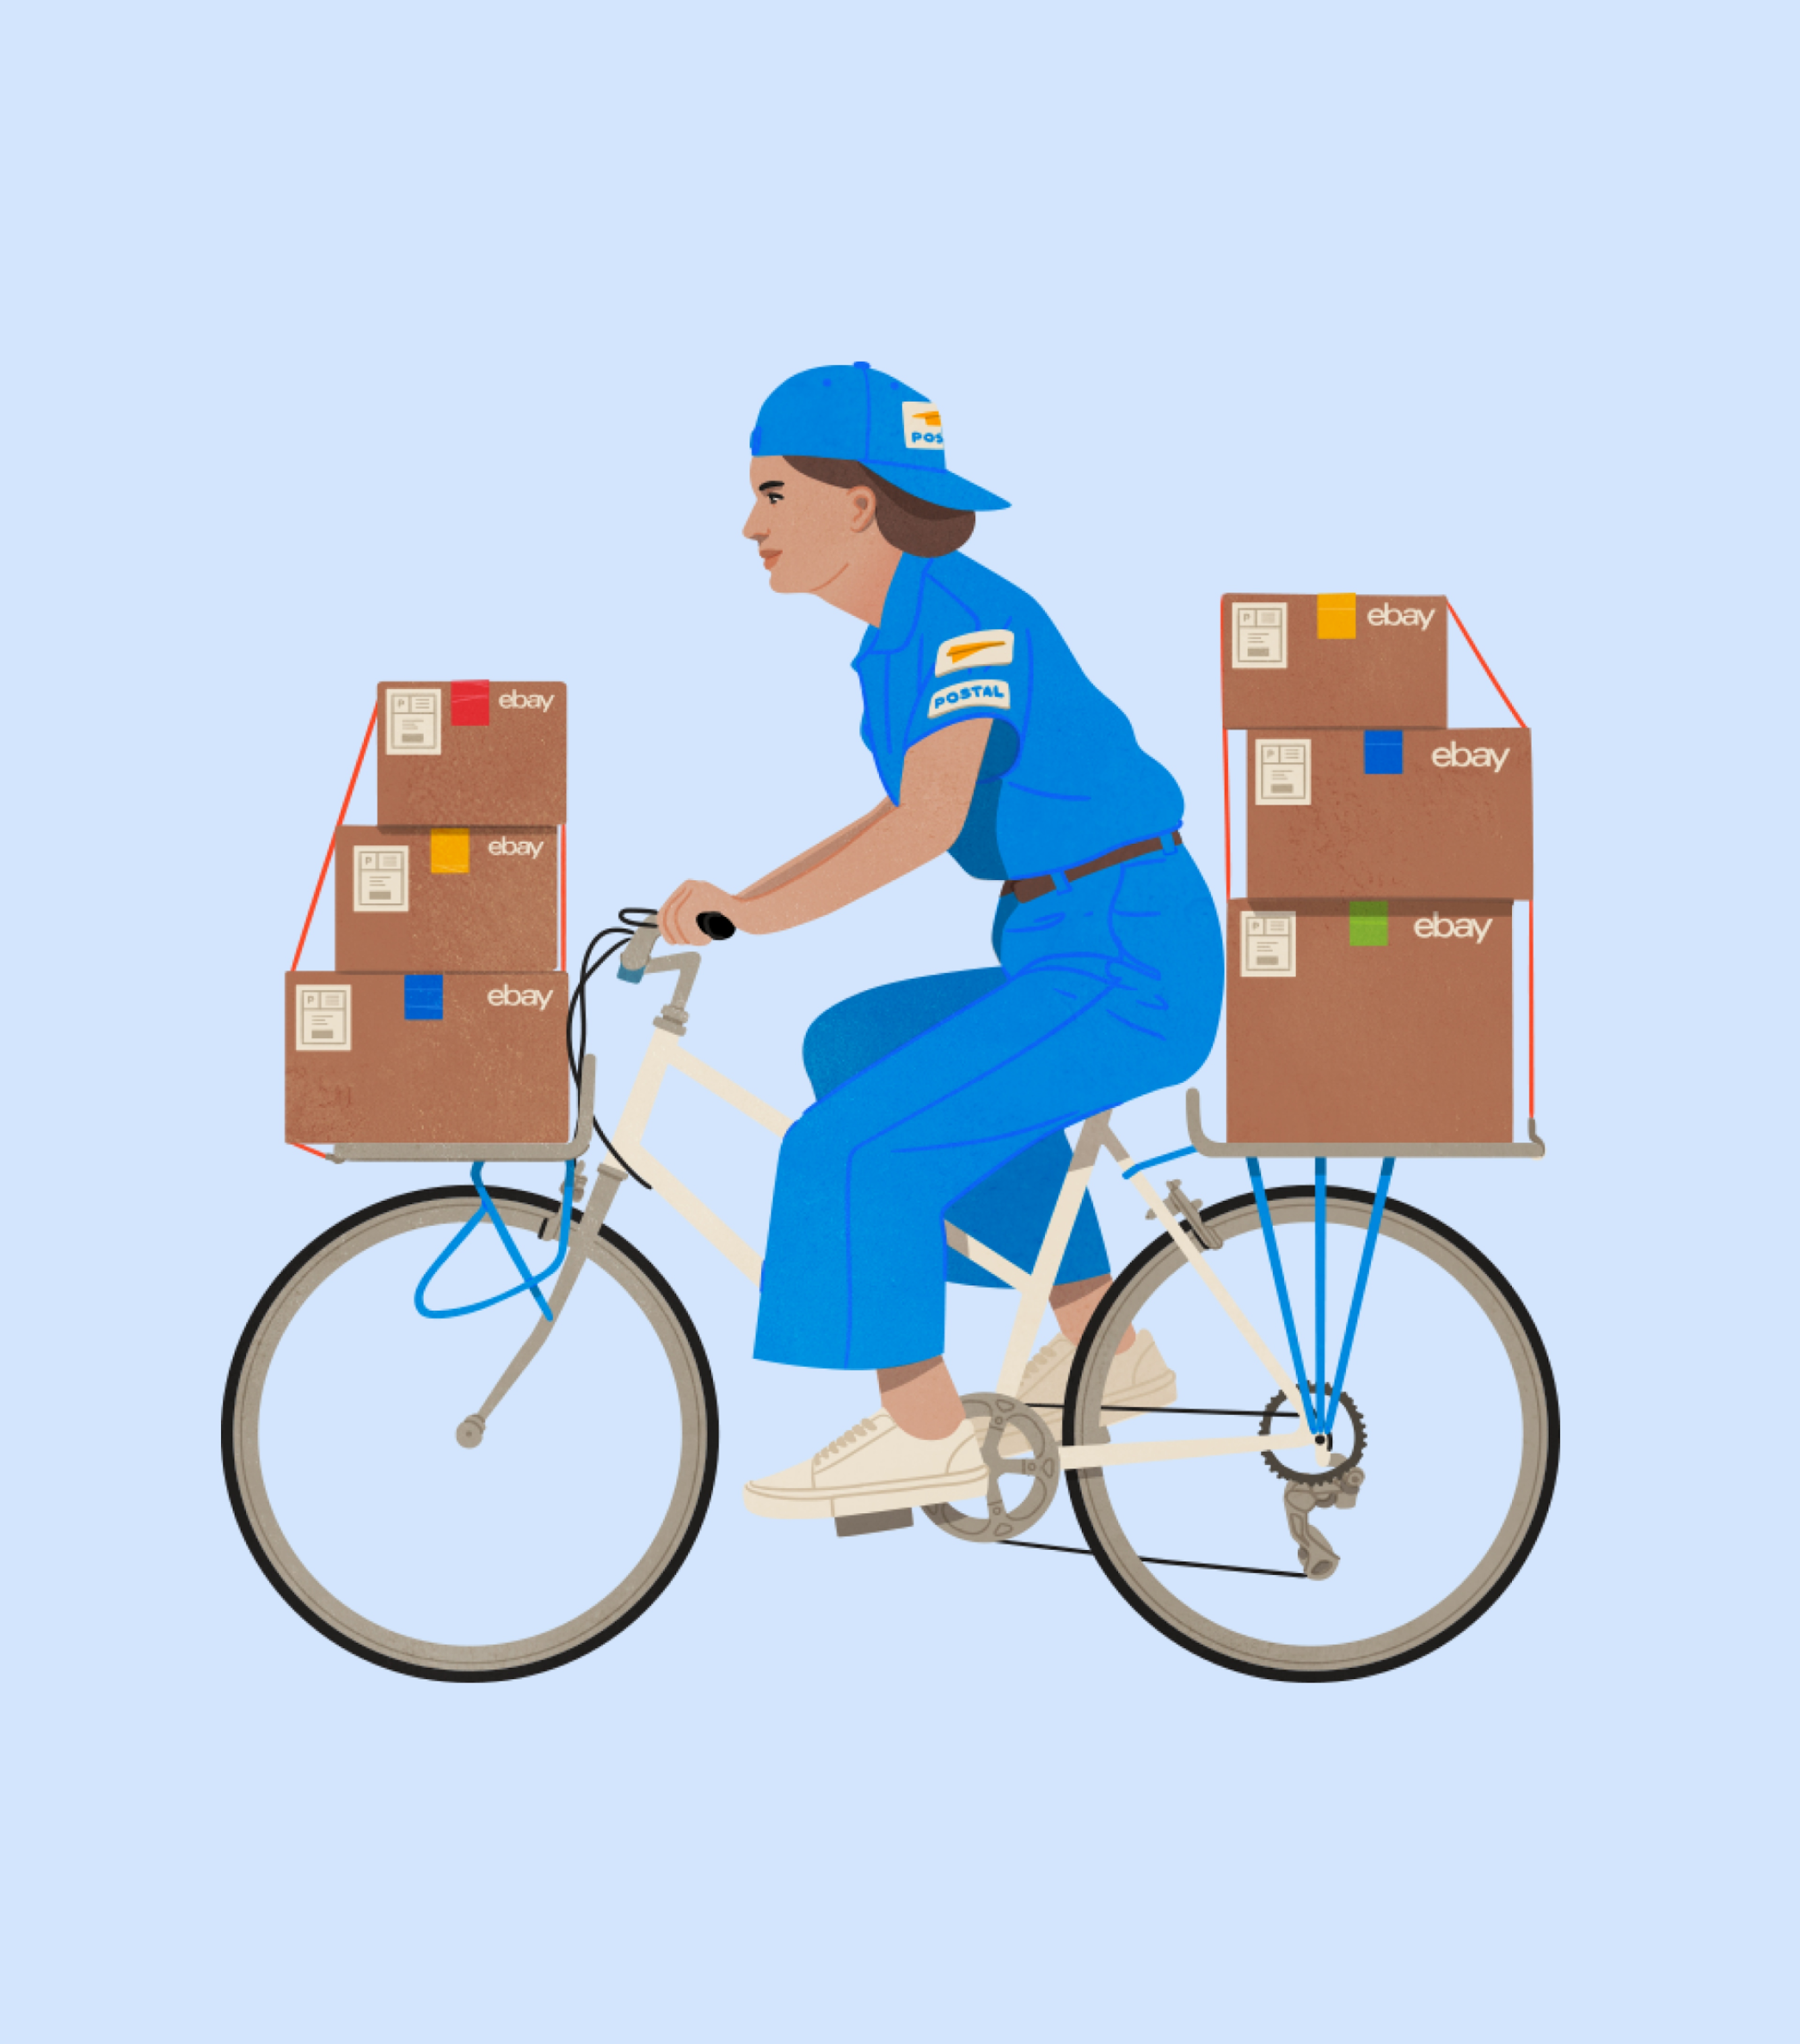 A colorful illustration of a woman riding a bike with 3 eBay boxes strapped to the front and back racks of her bike.